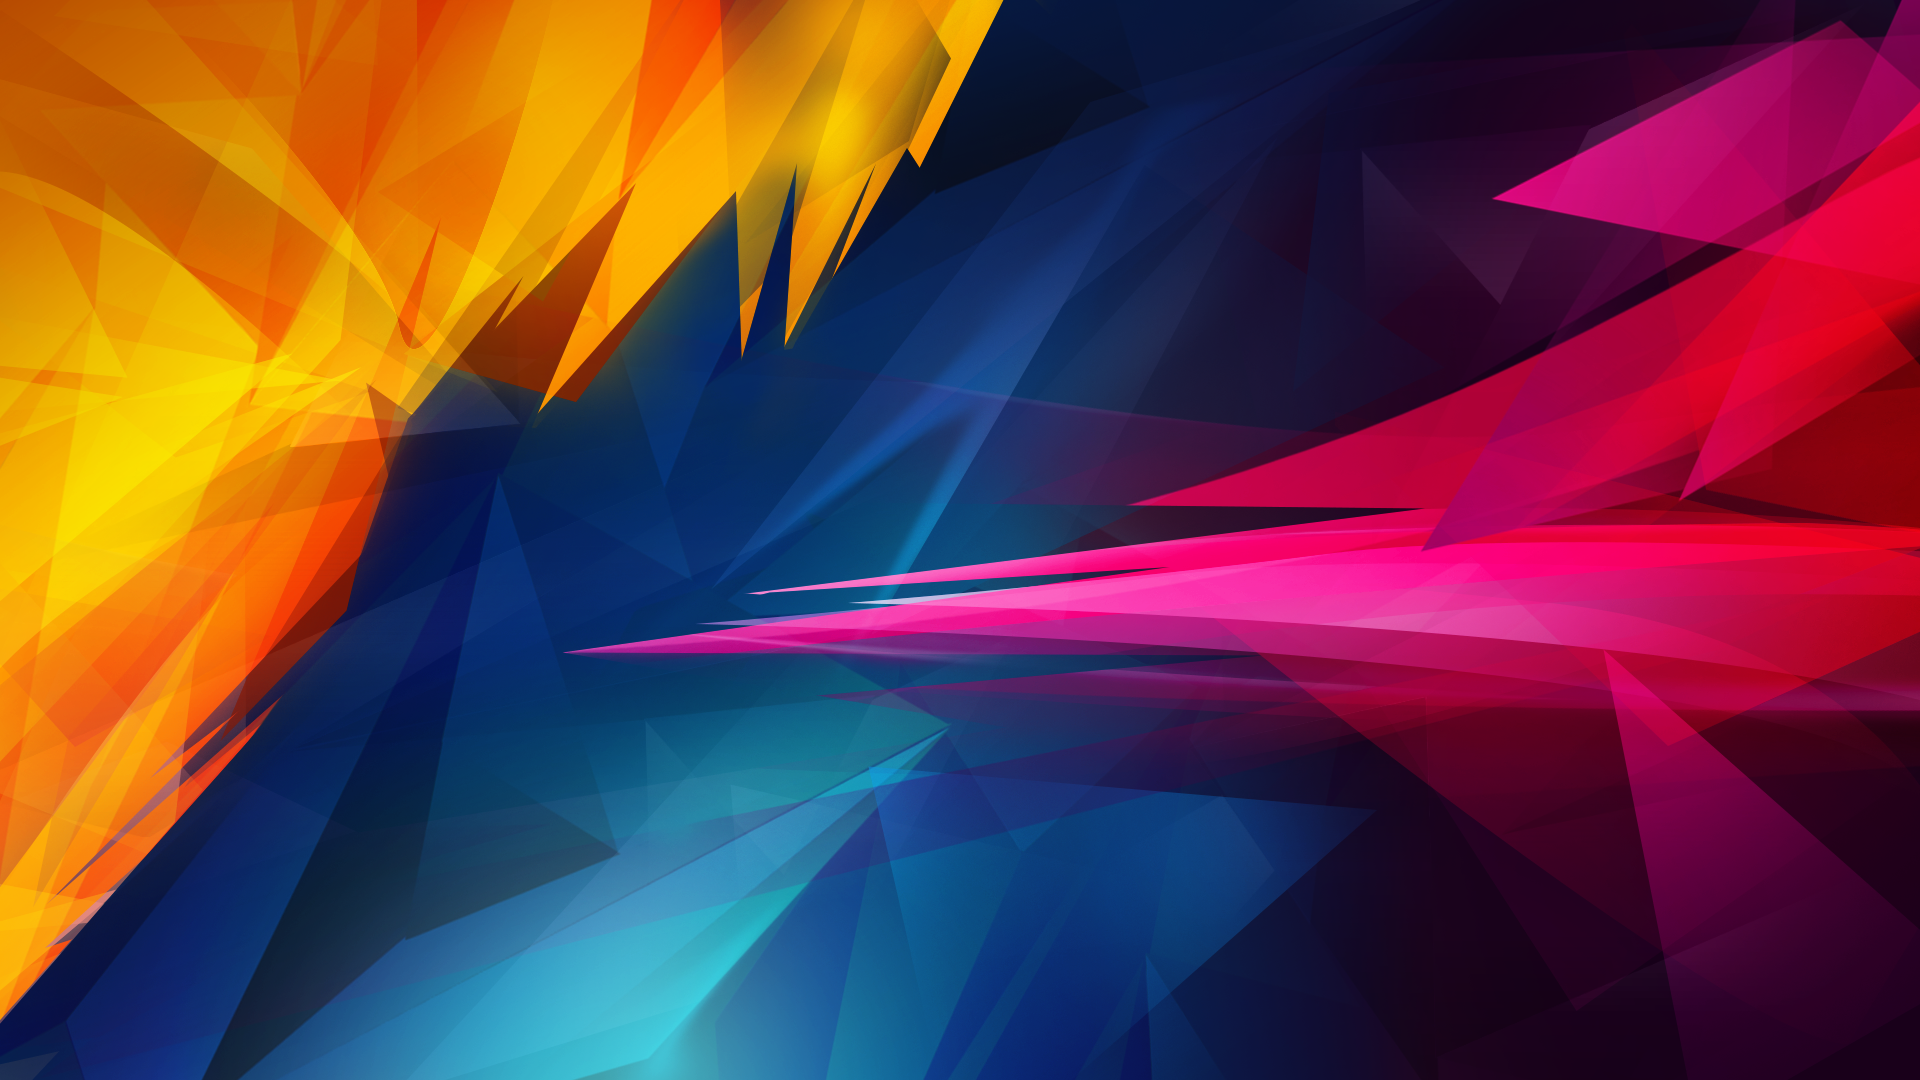 Abstract Artistic 1920x1080